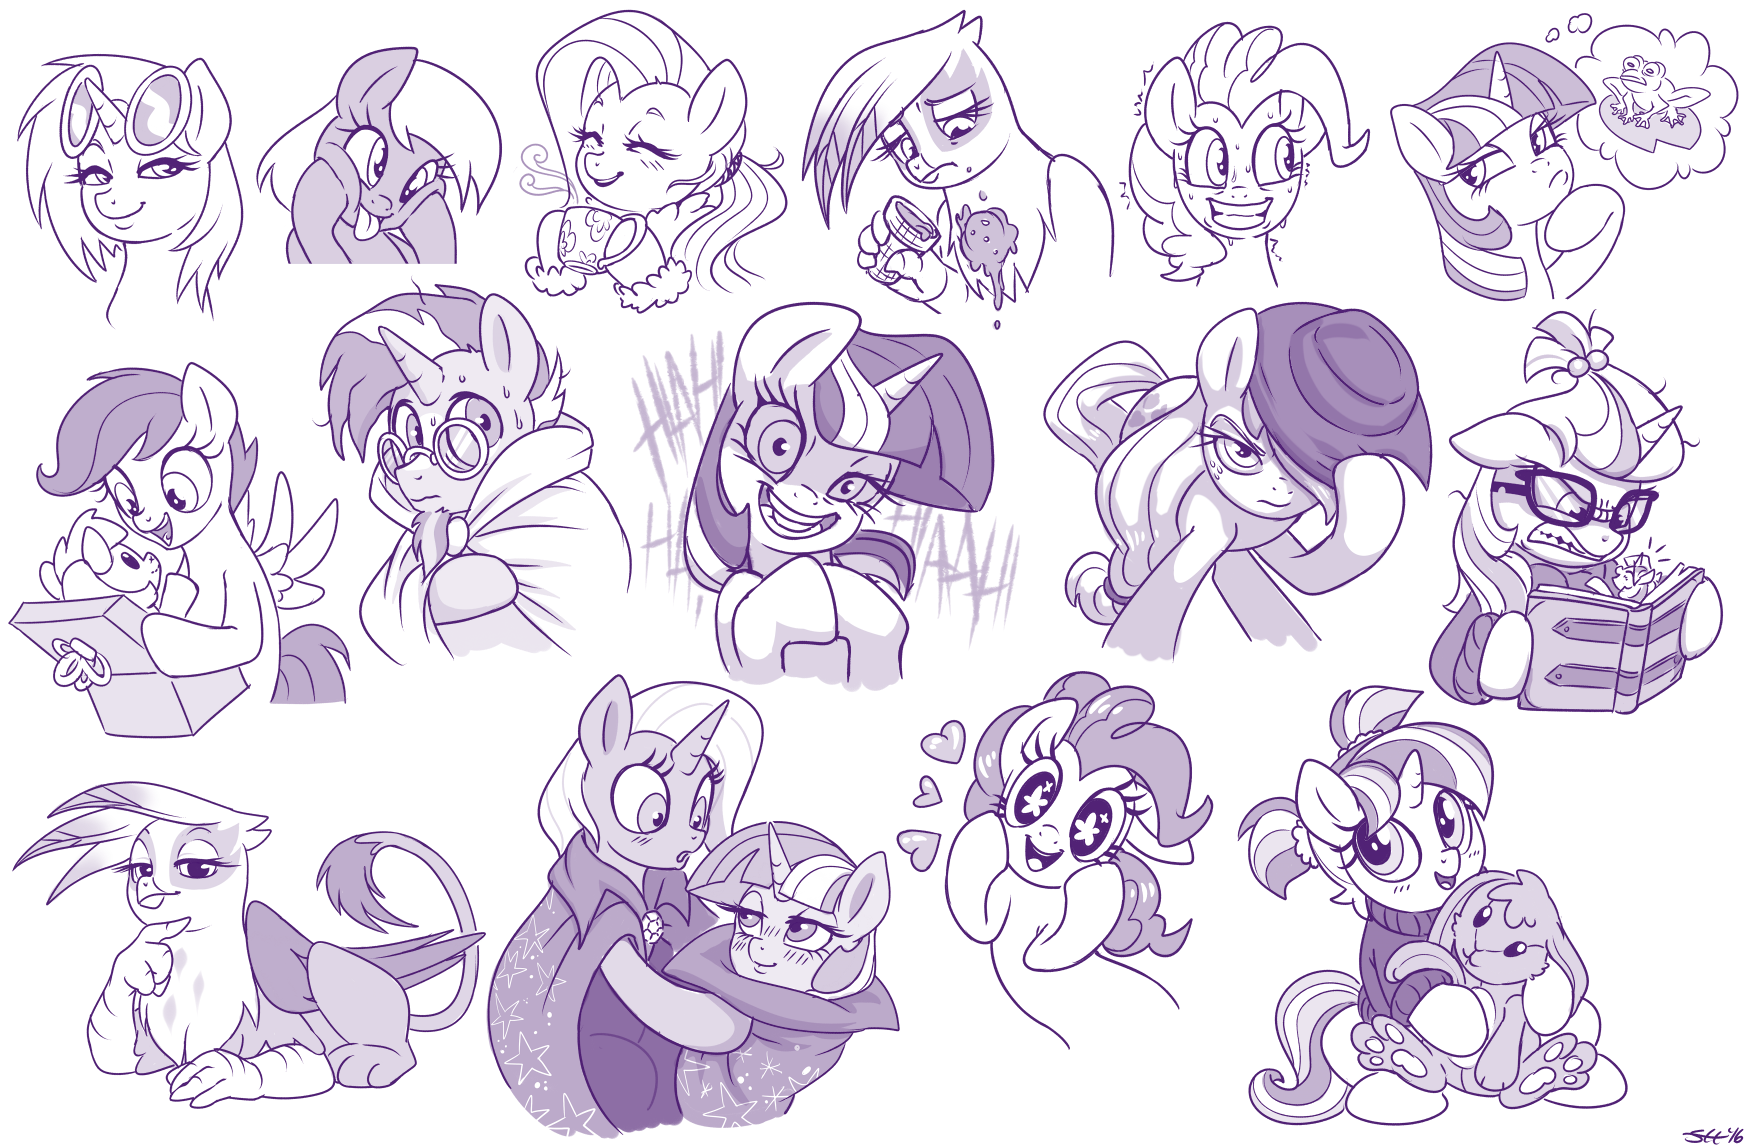 Pony Expressions!